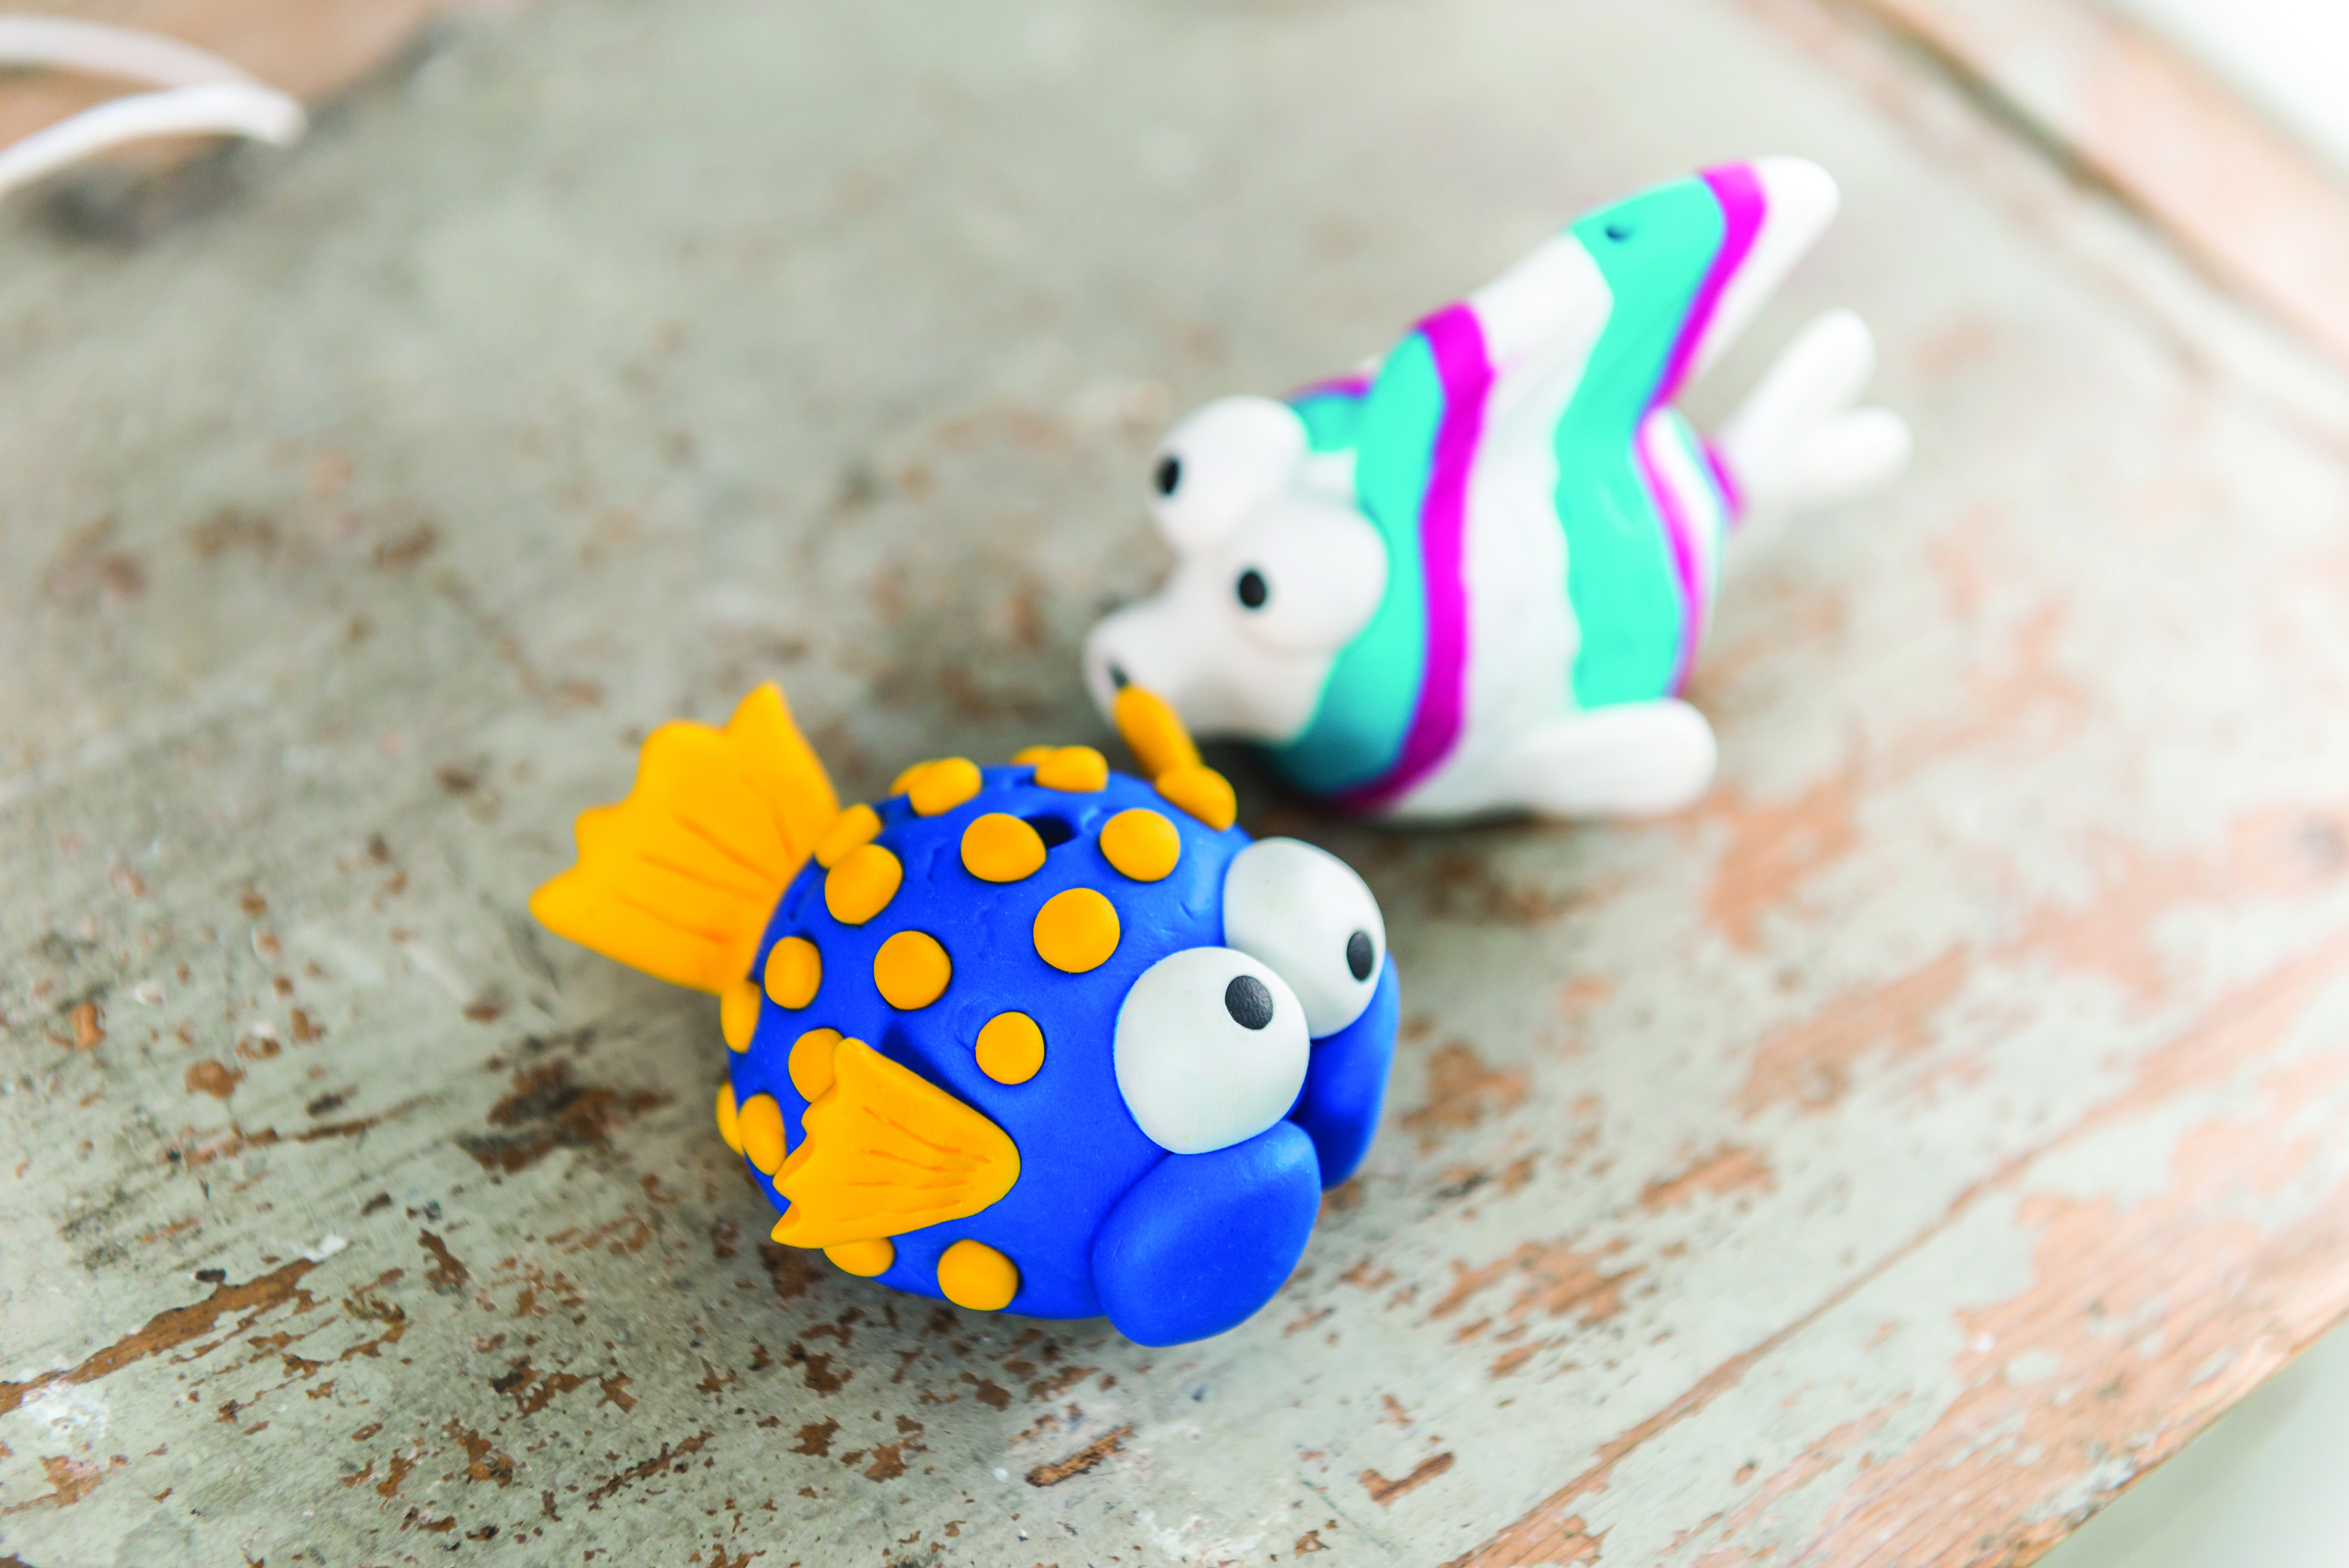 https://c02.purpledshub.com/uploads/sites/51/2021/11/How-to-use-polymer-clay-polymer-clay-for-beginners-pufferfish-85142f2.jpg